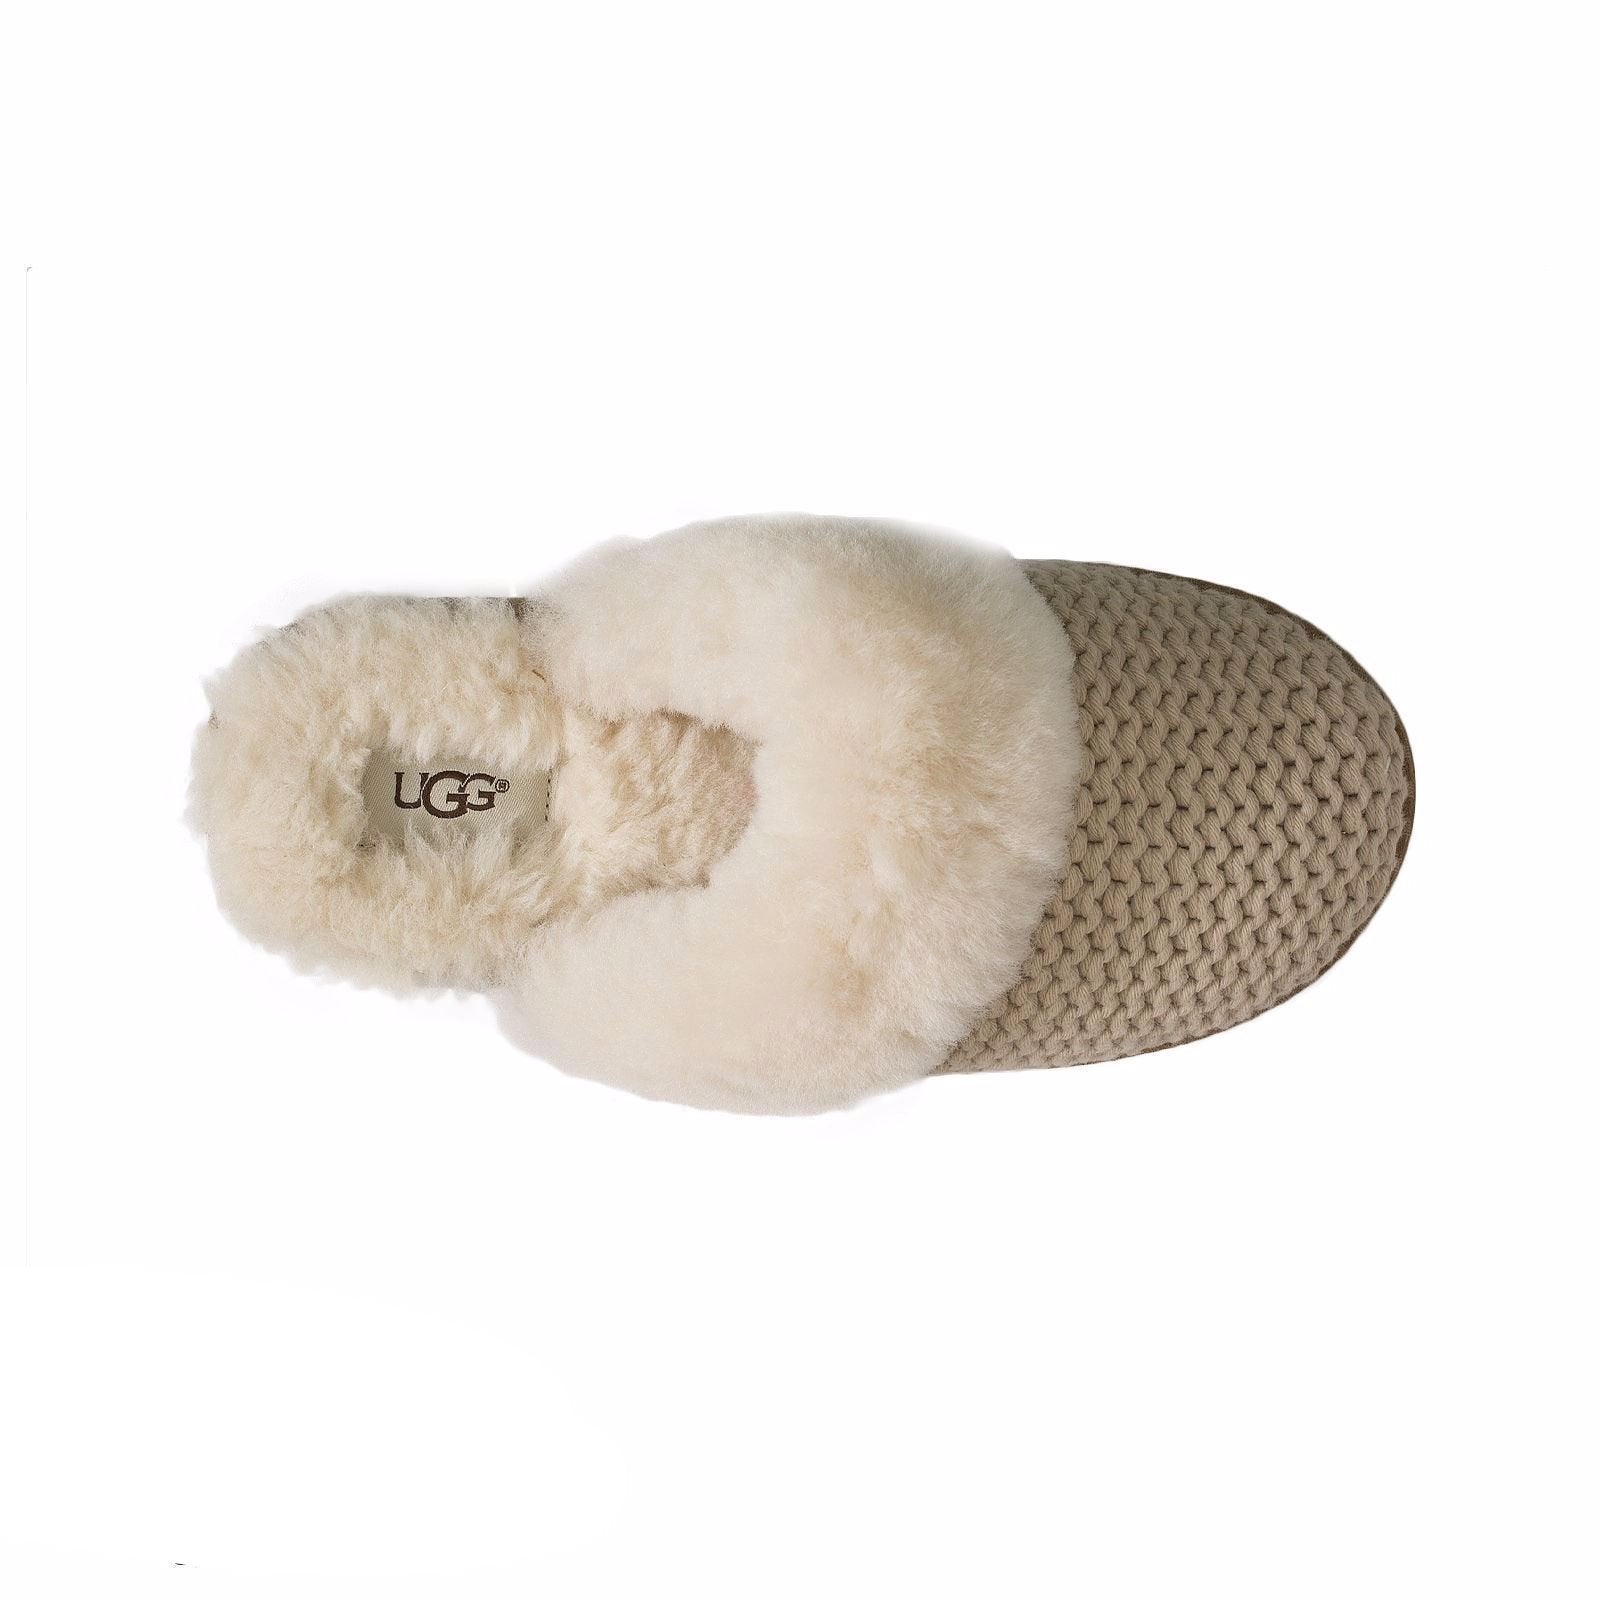 ugg aira knit slippers size 8